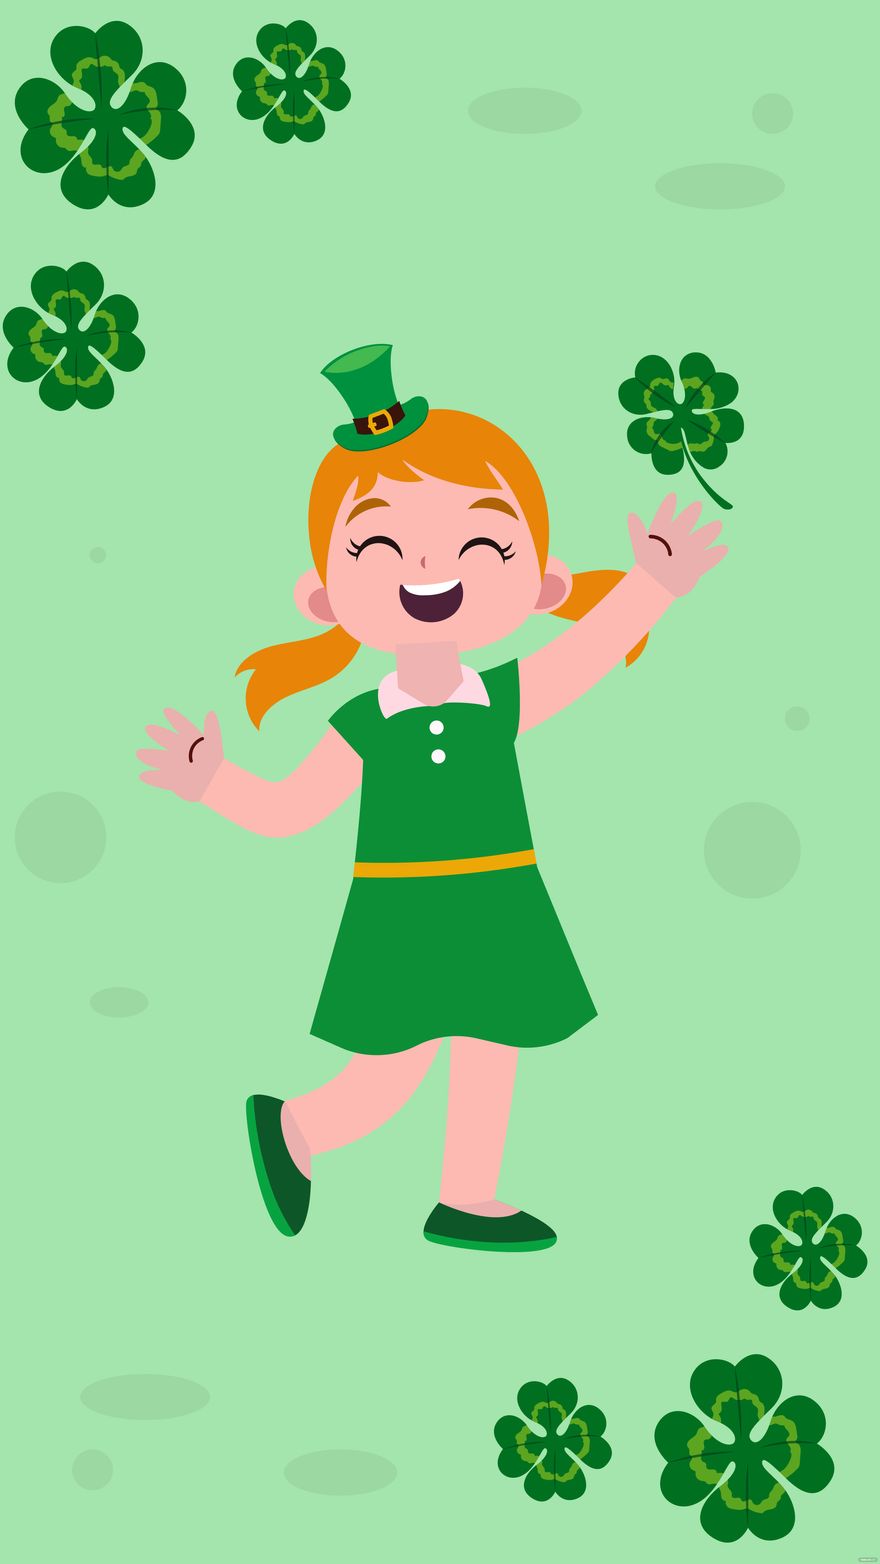 Free St. Patrick's Day iPhone Background in PDF, Illustrator, PSD, EPS, SVG, JPG, PNG